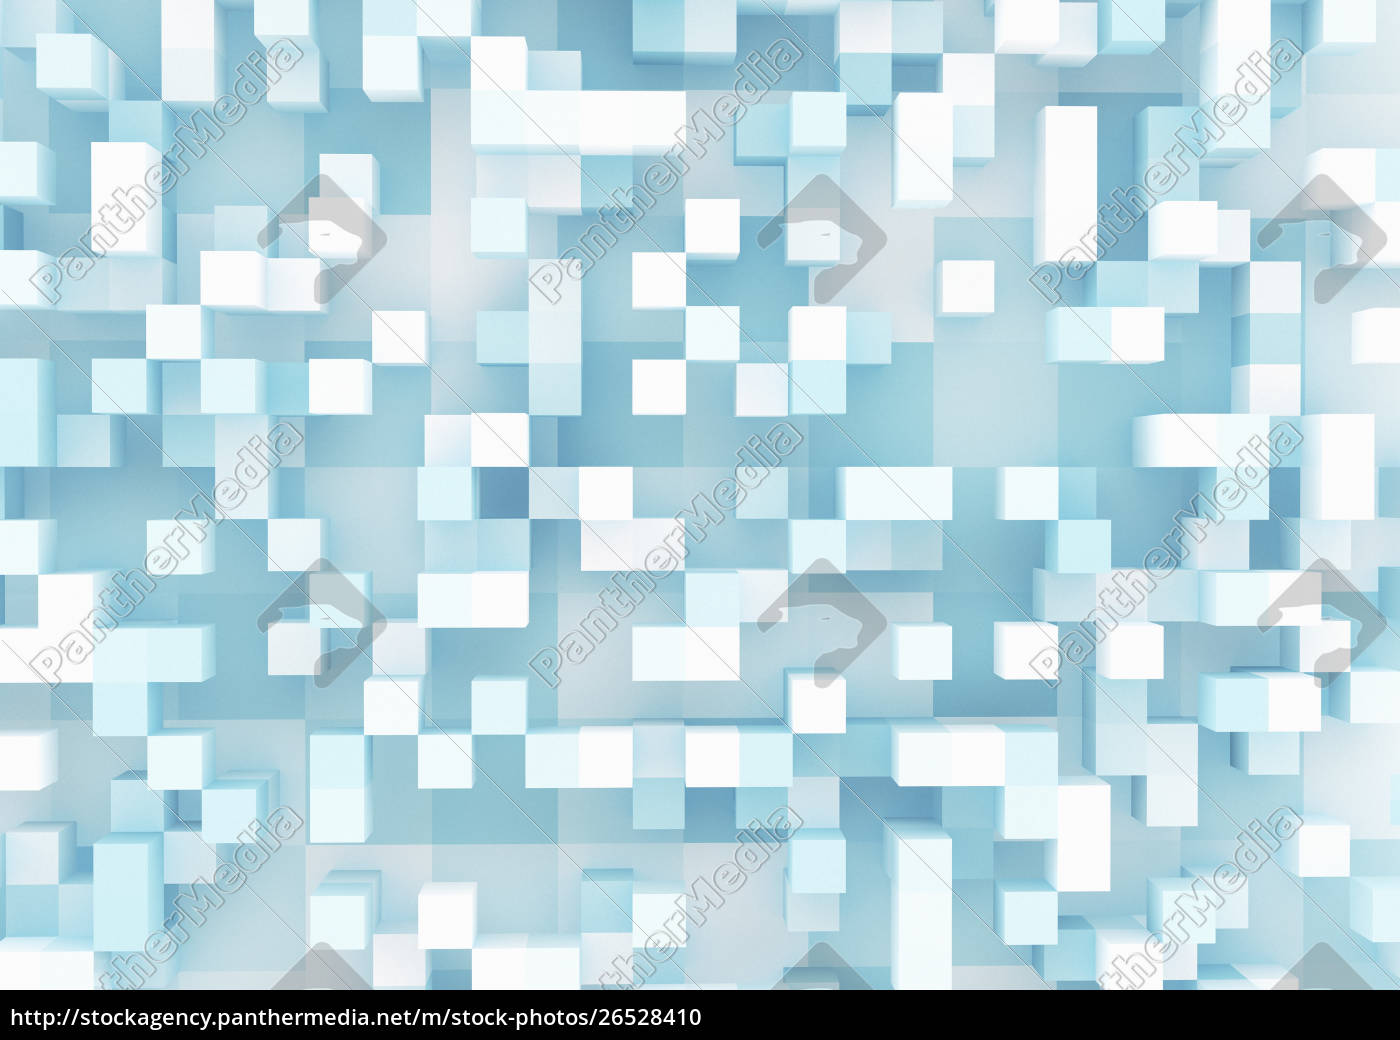 Stock Image 26528410 Three Dimensional Cube Grid Pattern